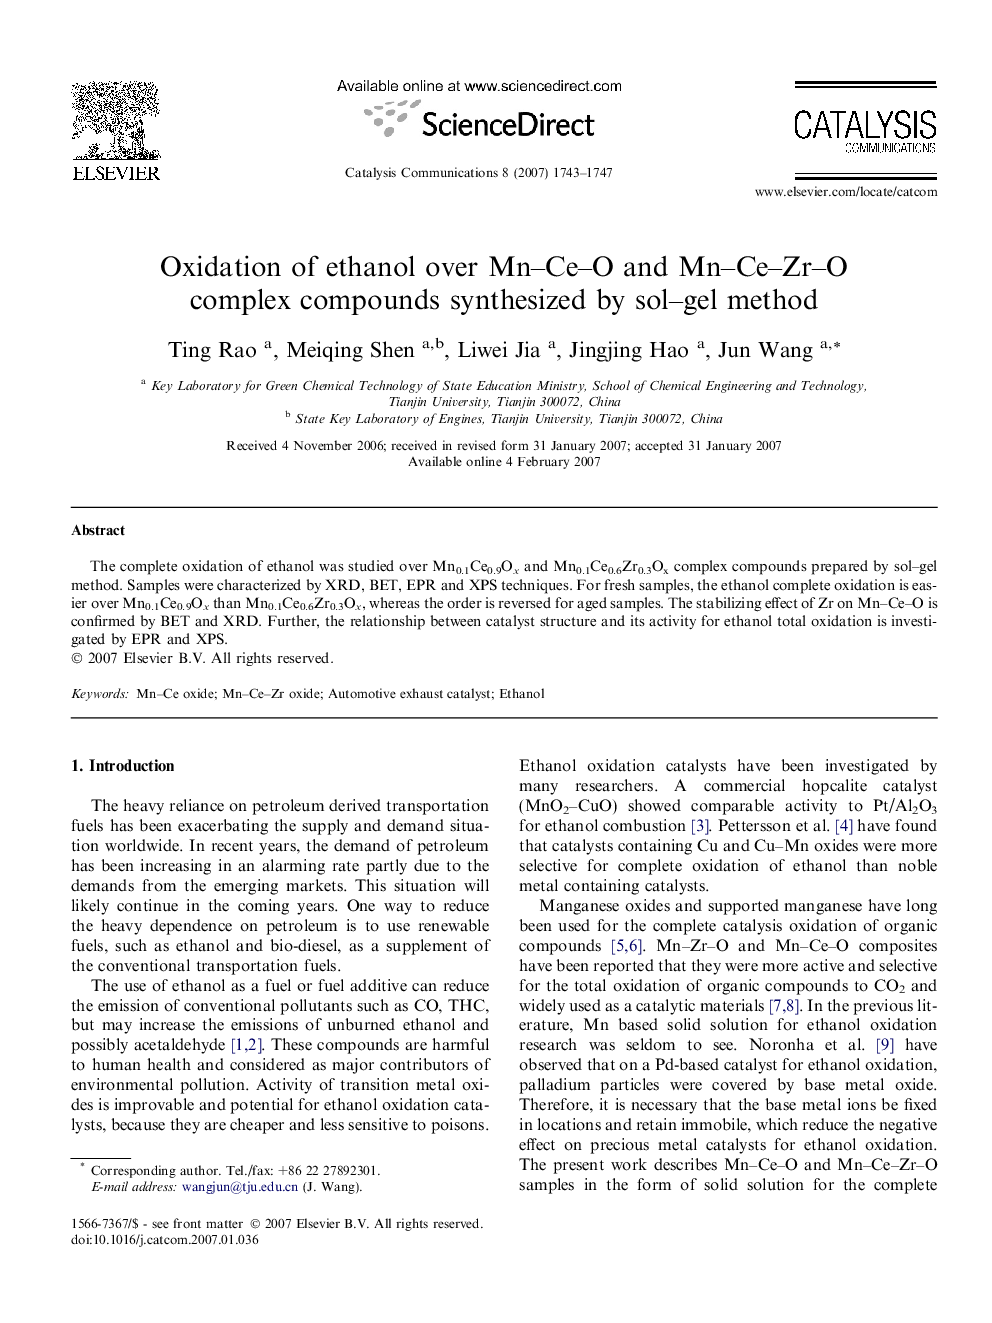 Oxidation of ethanol over Mn–Ce–O and Mn–Ce–Zr–O complex compounds synthesized by sol–gel method